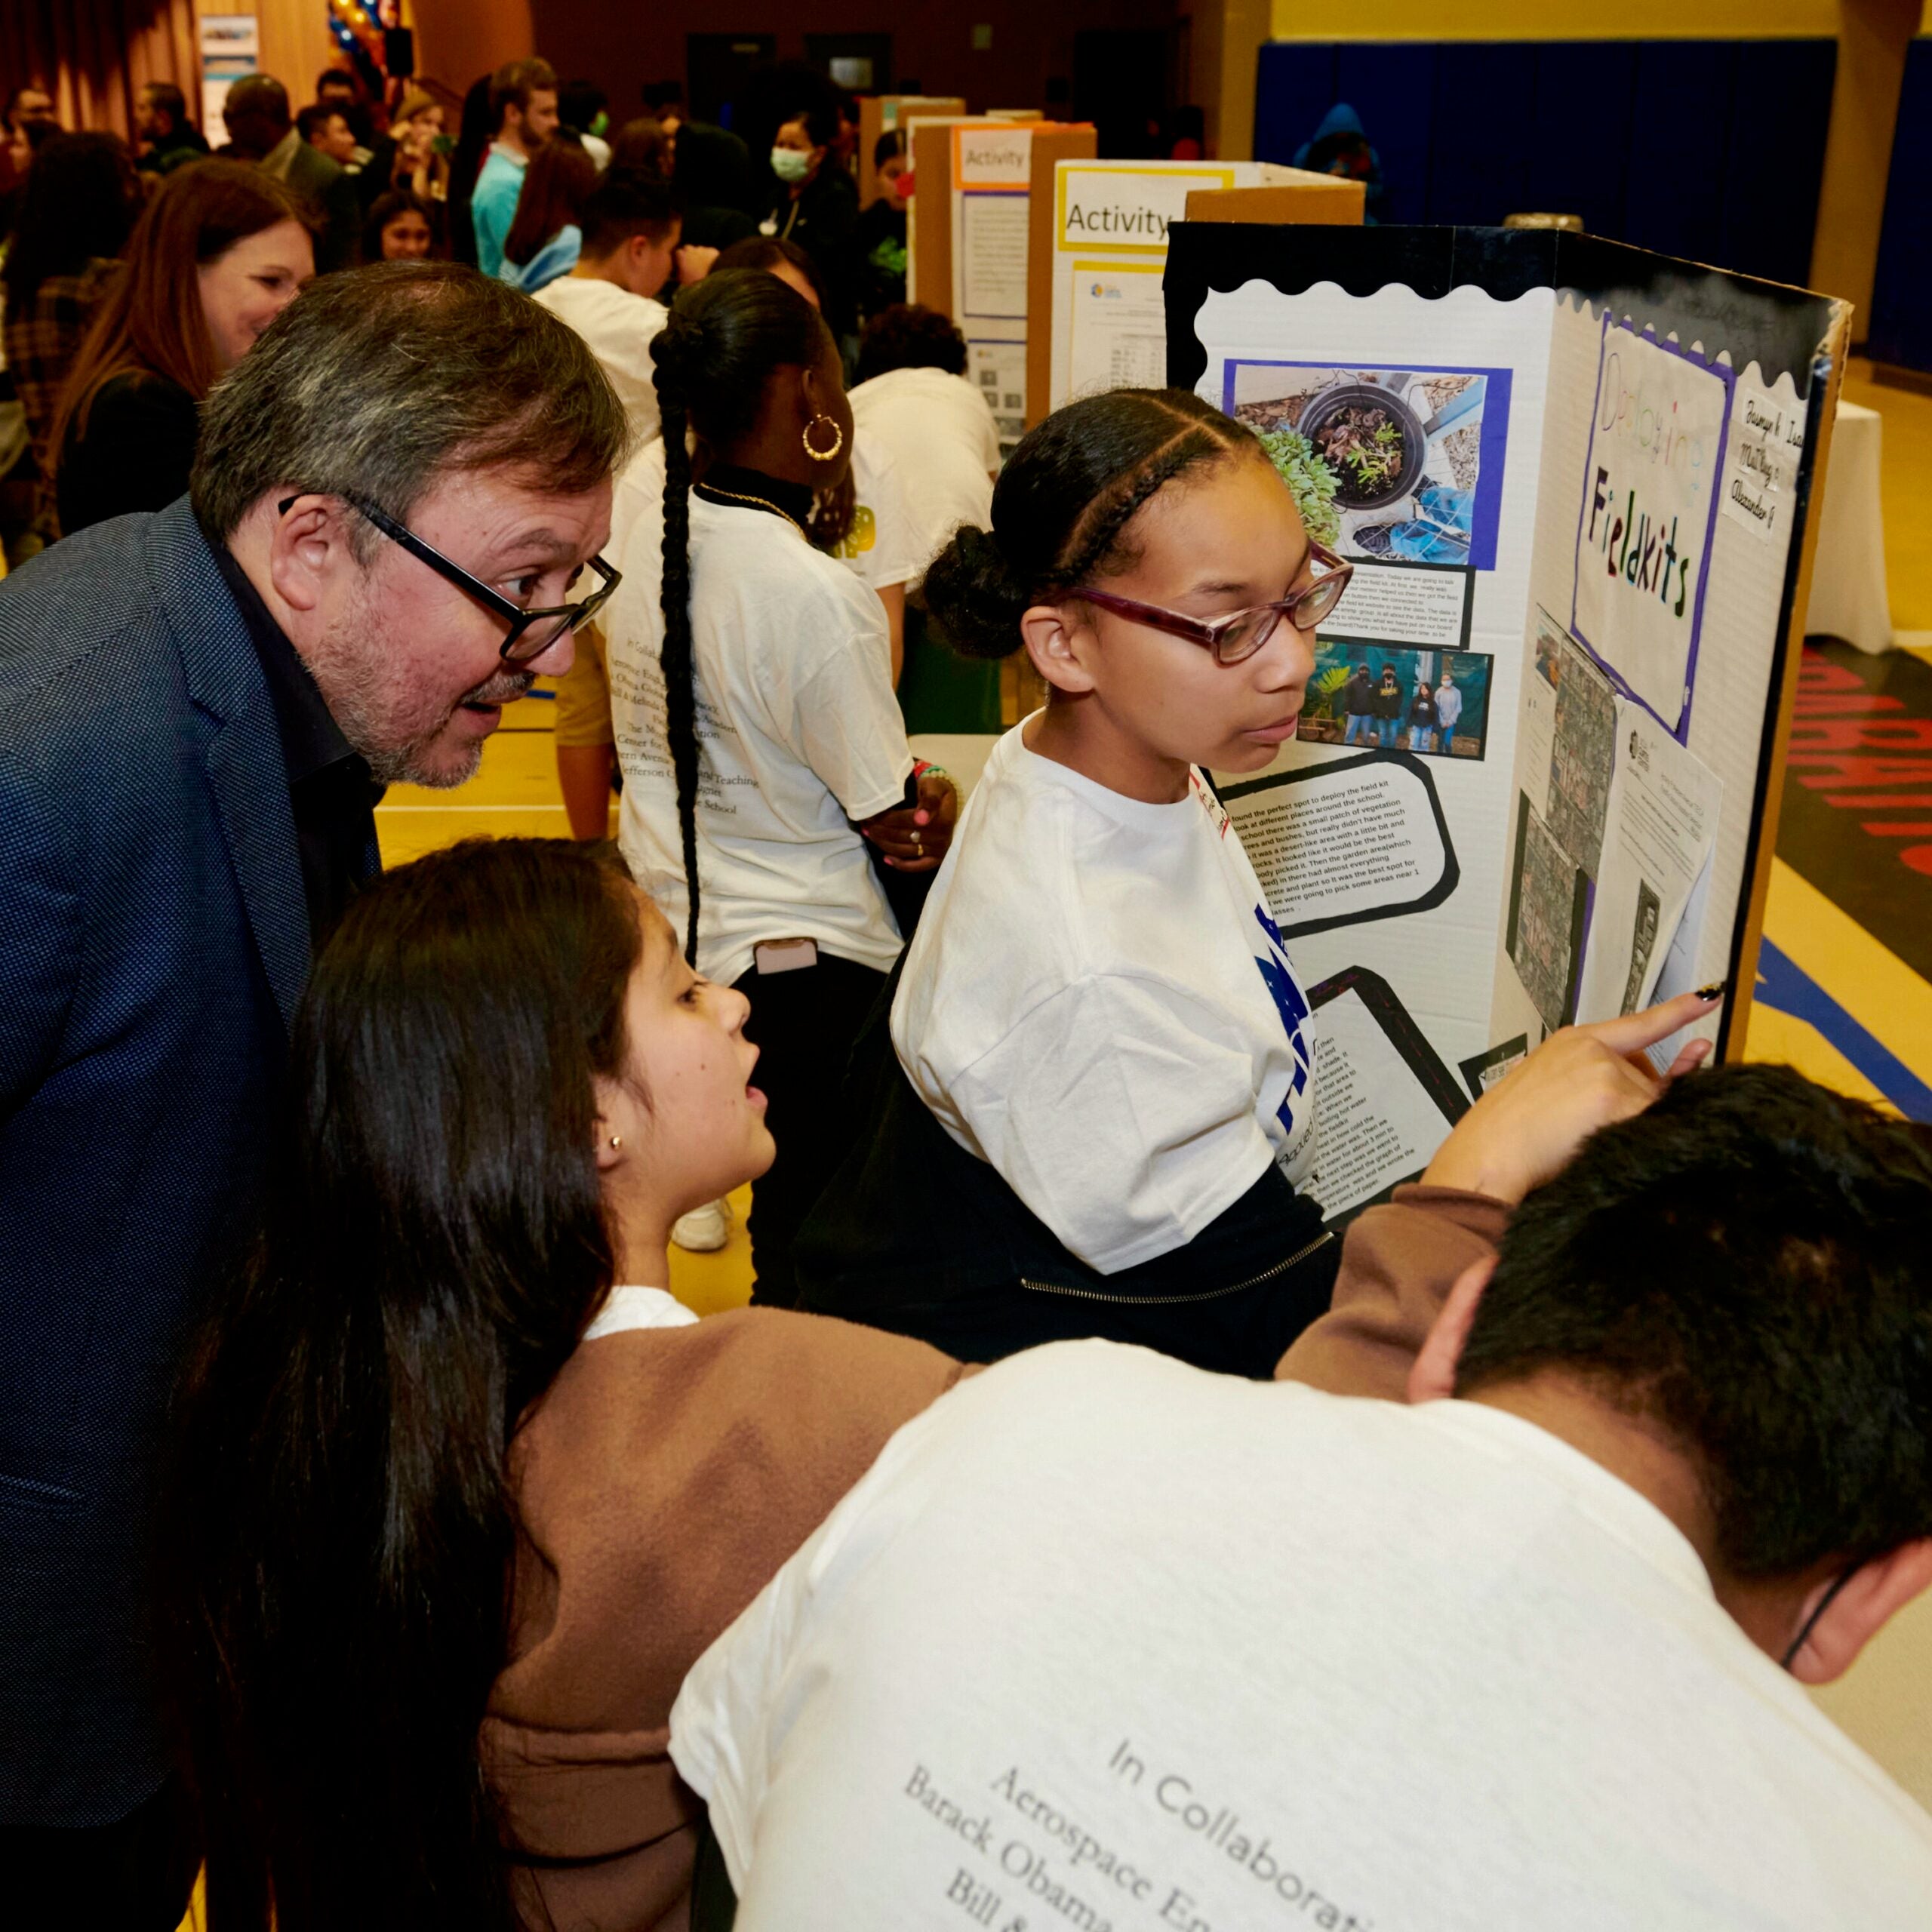 Image displays Miguel Garcia-Garibay, dean of Physical Science at UCLA, listening to students present the findings of their research investigations.